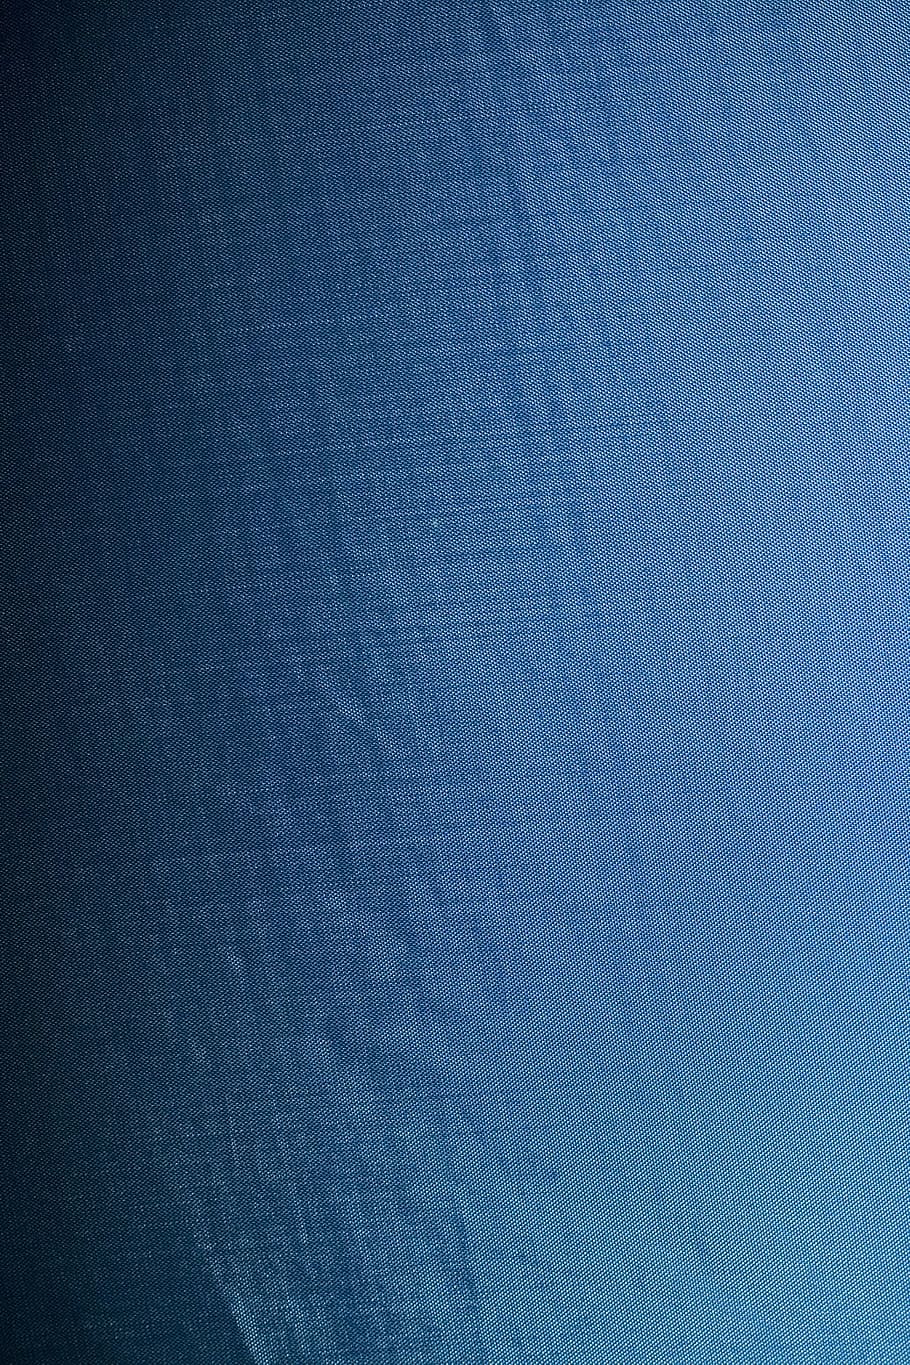 backdrop, backgrounds, blank, blue, canvas, close-up, cloth, clothing, color, cotton